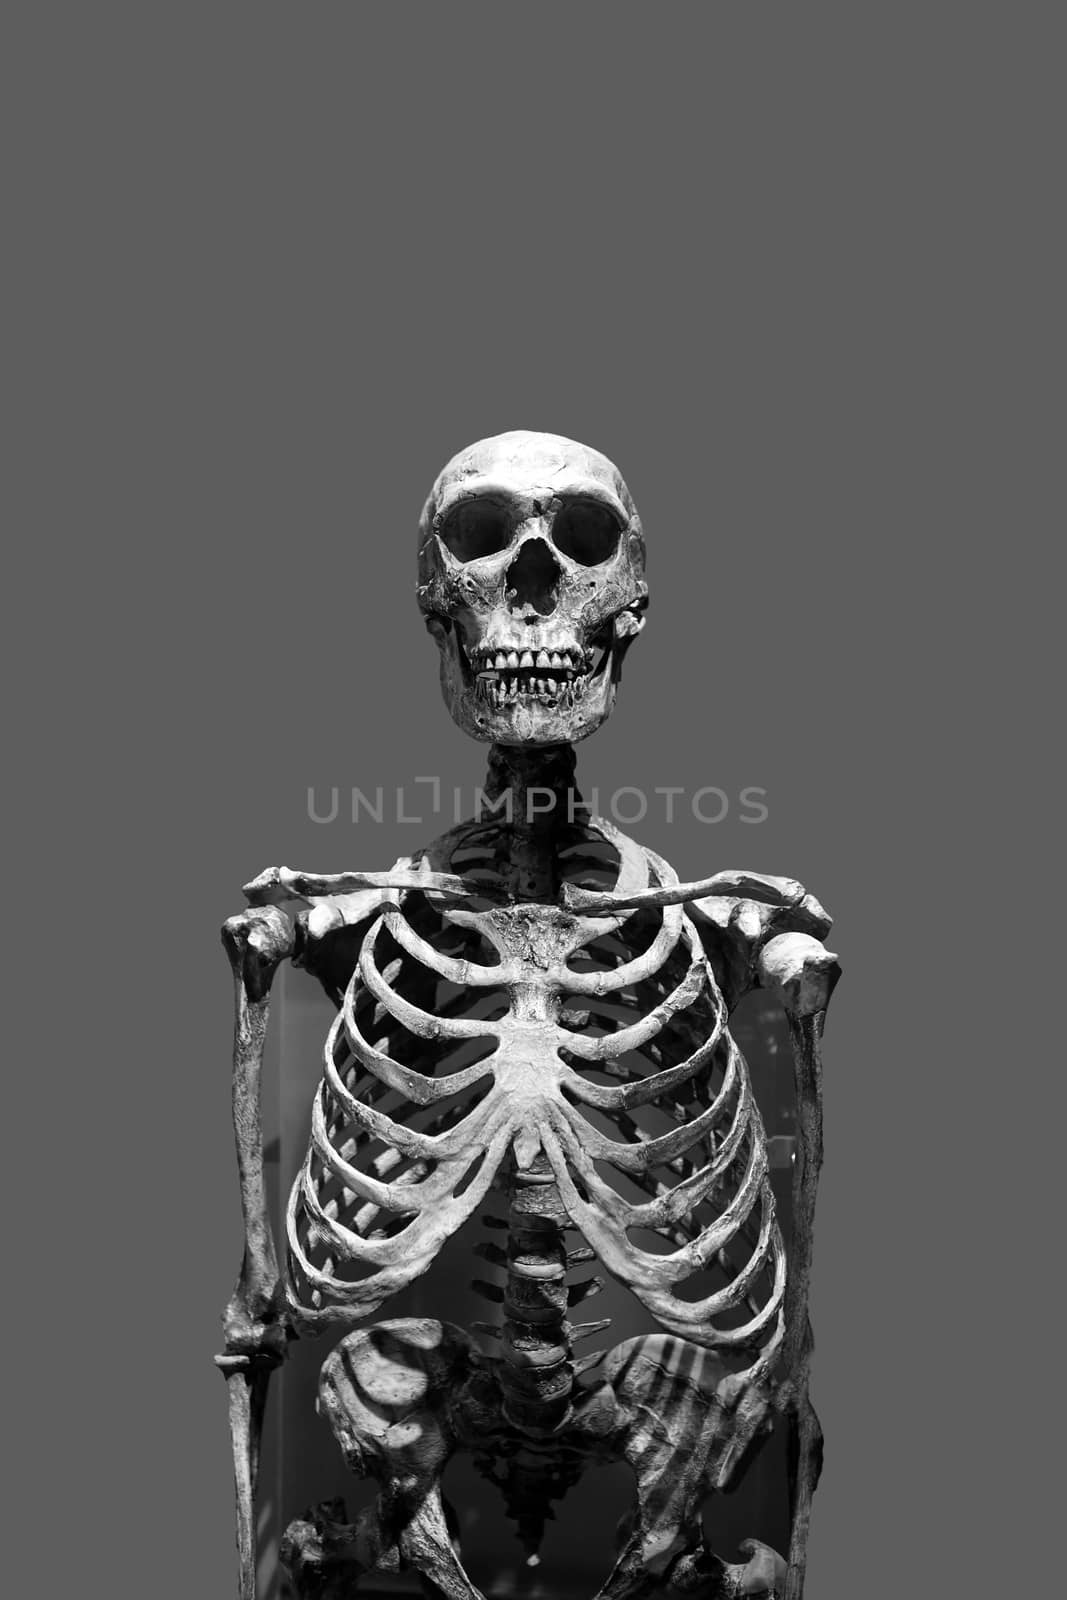 Old bony skeleton isolated over a gray background in black and white.